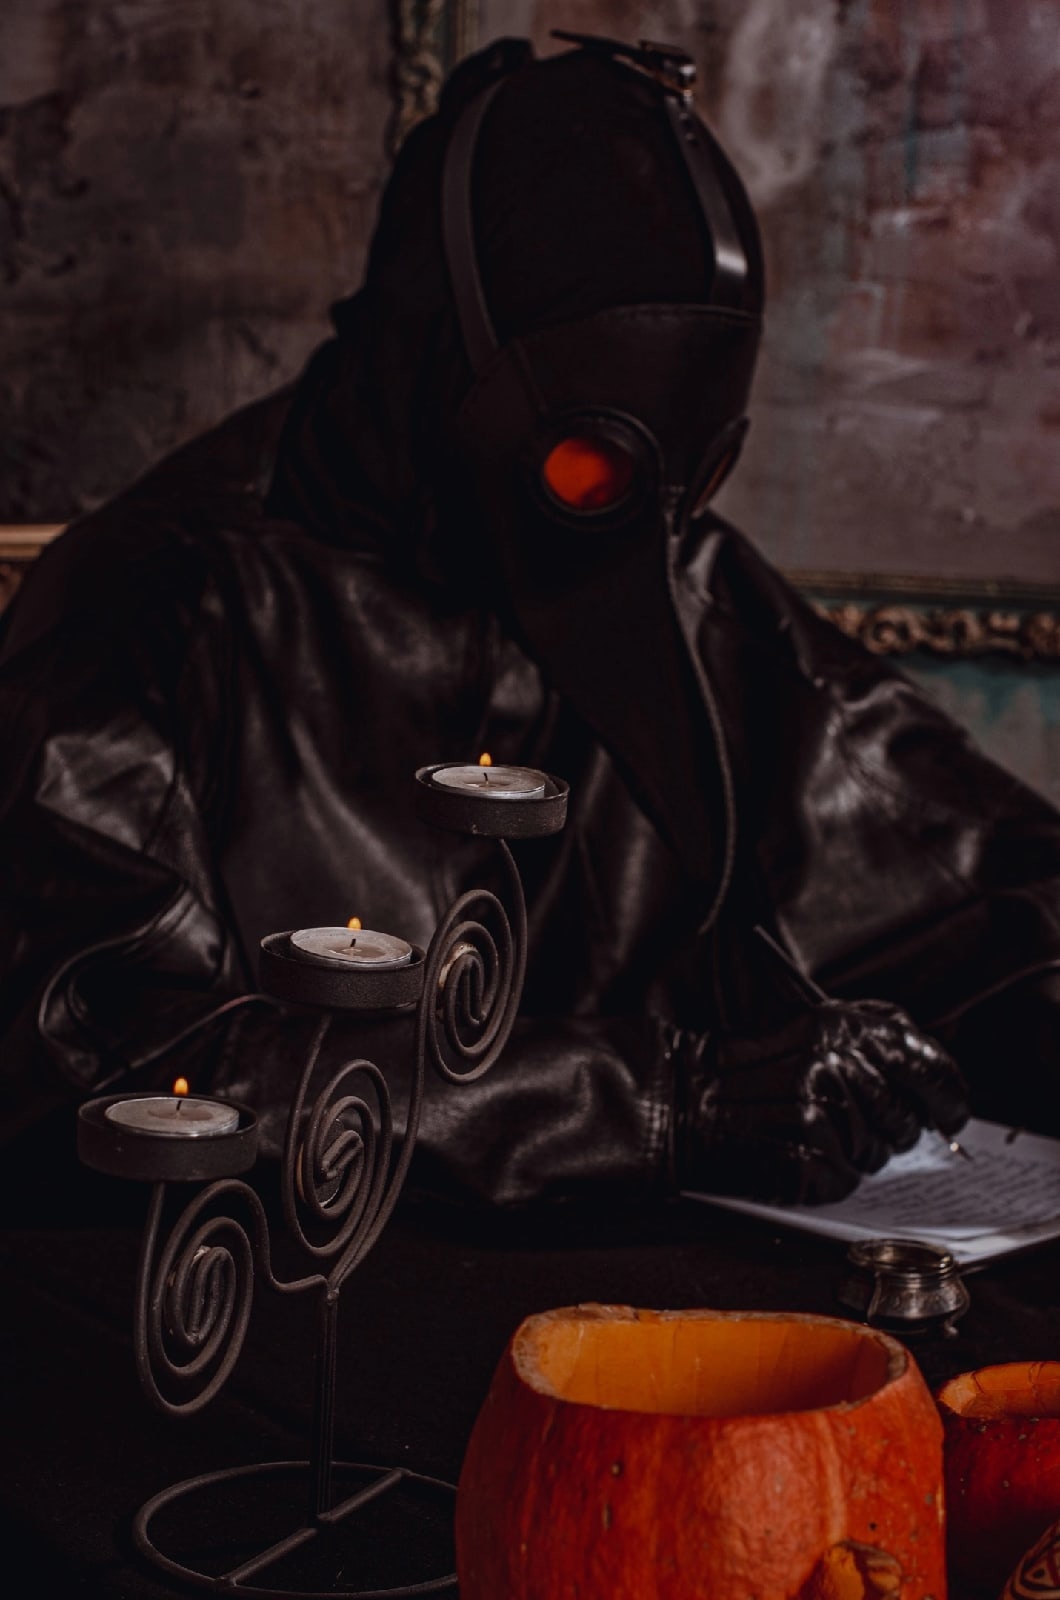 Plague Dr. Alex Russo in his office - Pestilence, Blood, Beautiful, Body, Middle Ages, Suffering middle ages, Photographer, Longpost, Models, Gothic, Cosplayers, Plague Doctor Mask, Plague Doctor, Plague, Professional shooting, PHOTOSESSION, Mask, Cosplay, The photo, My